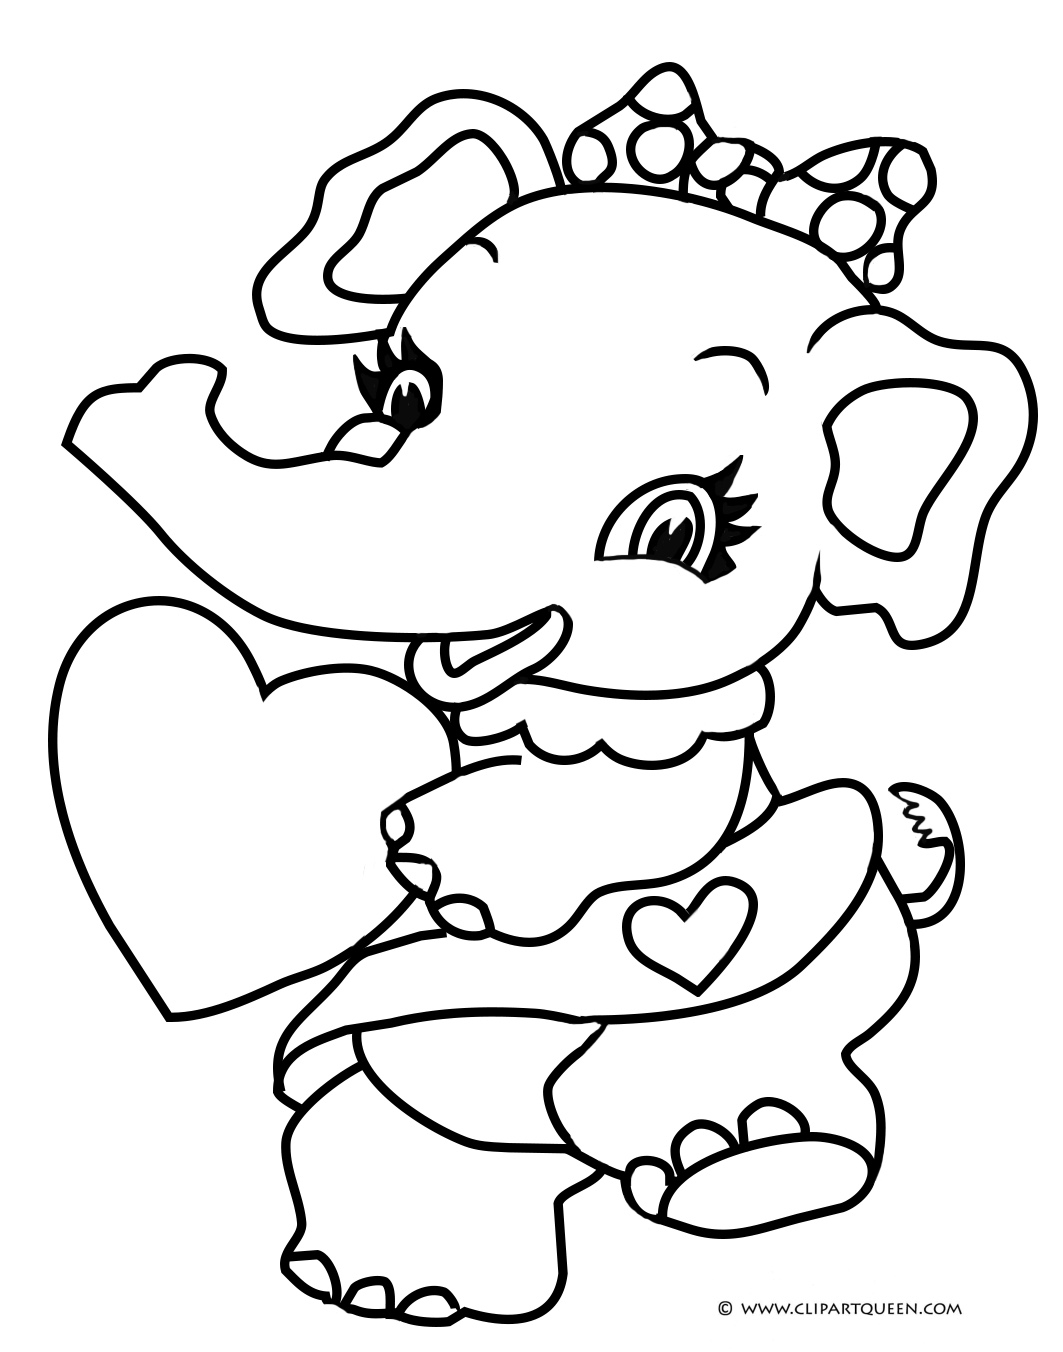 Cute and funny Valentines day coloring page